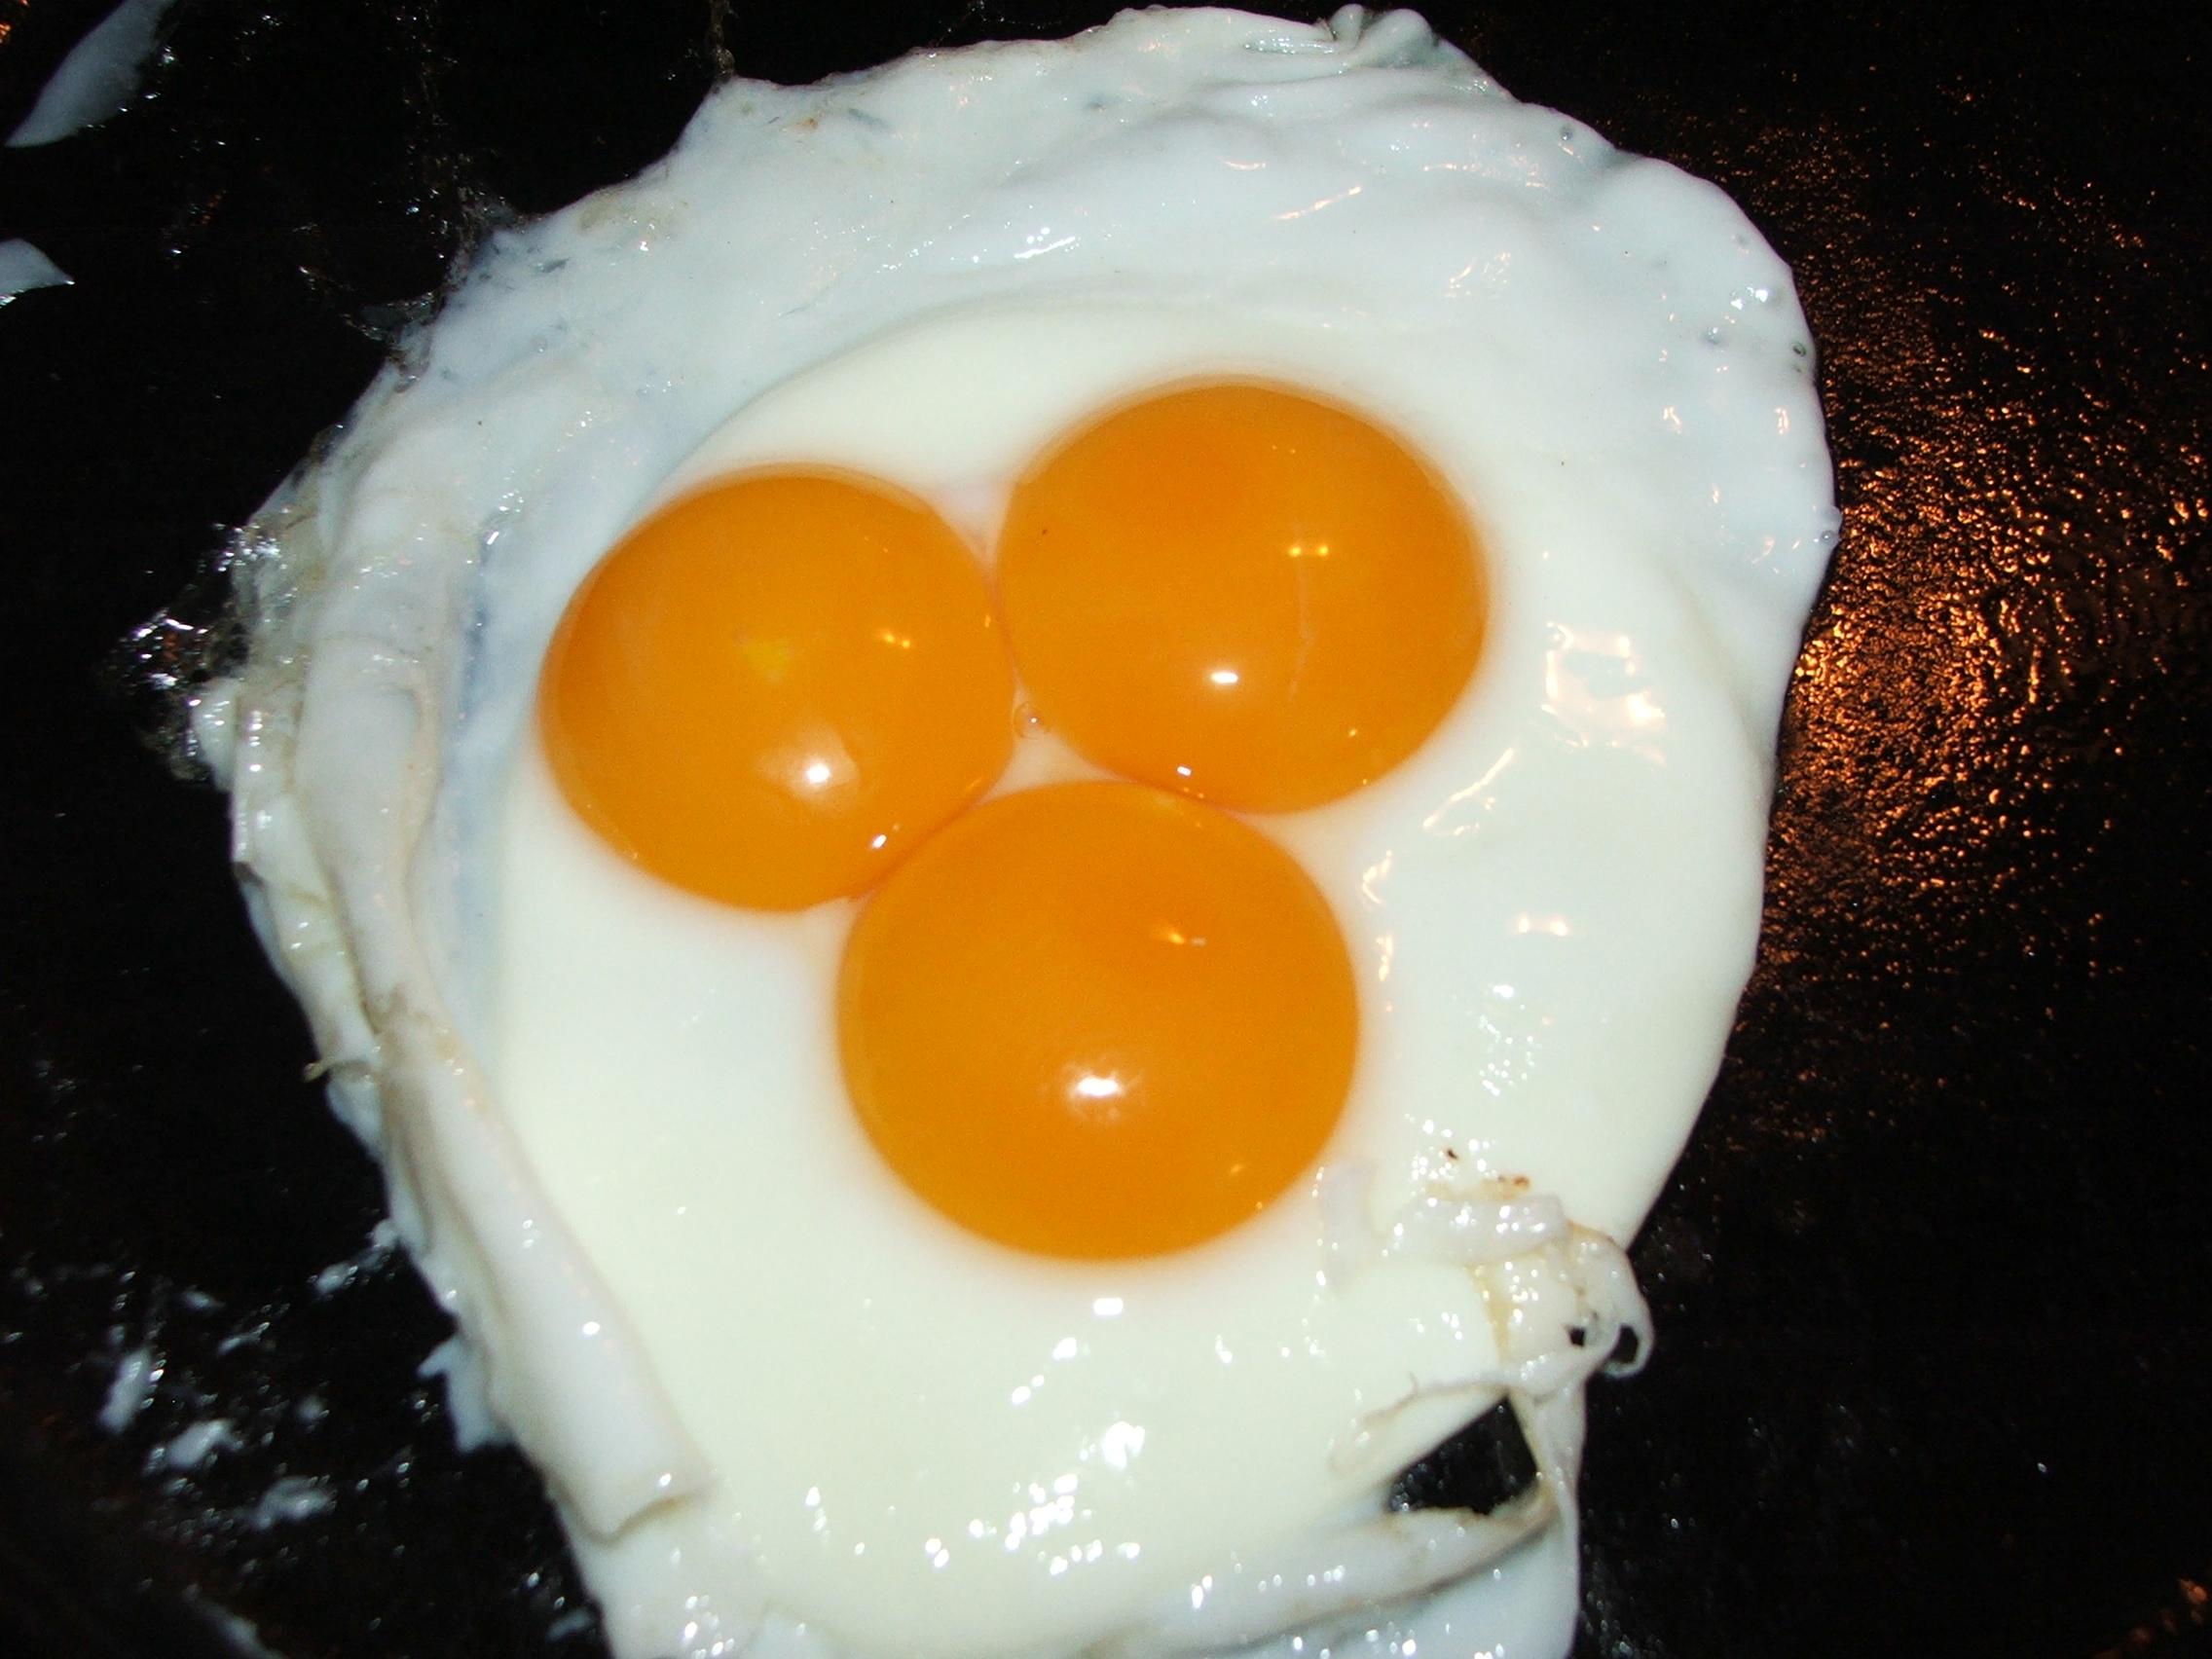 One of my chickens laid a very large egg yesterday.  I cracked it for breakfast expecting to find a double yoke but was surprised by this.  Anyone ever seen one of these?